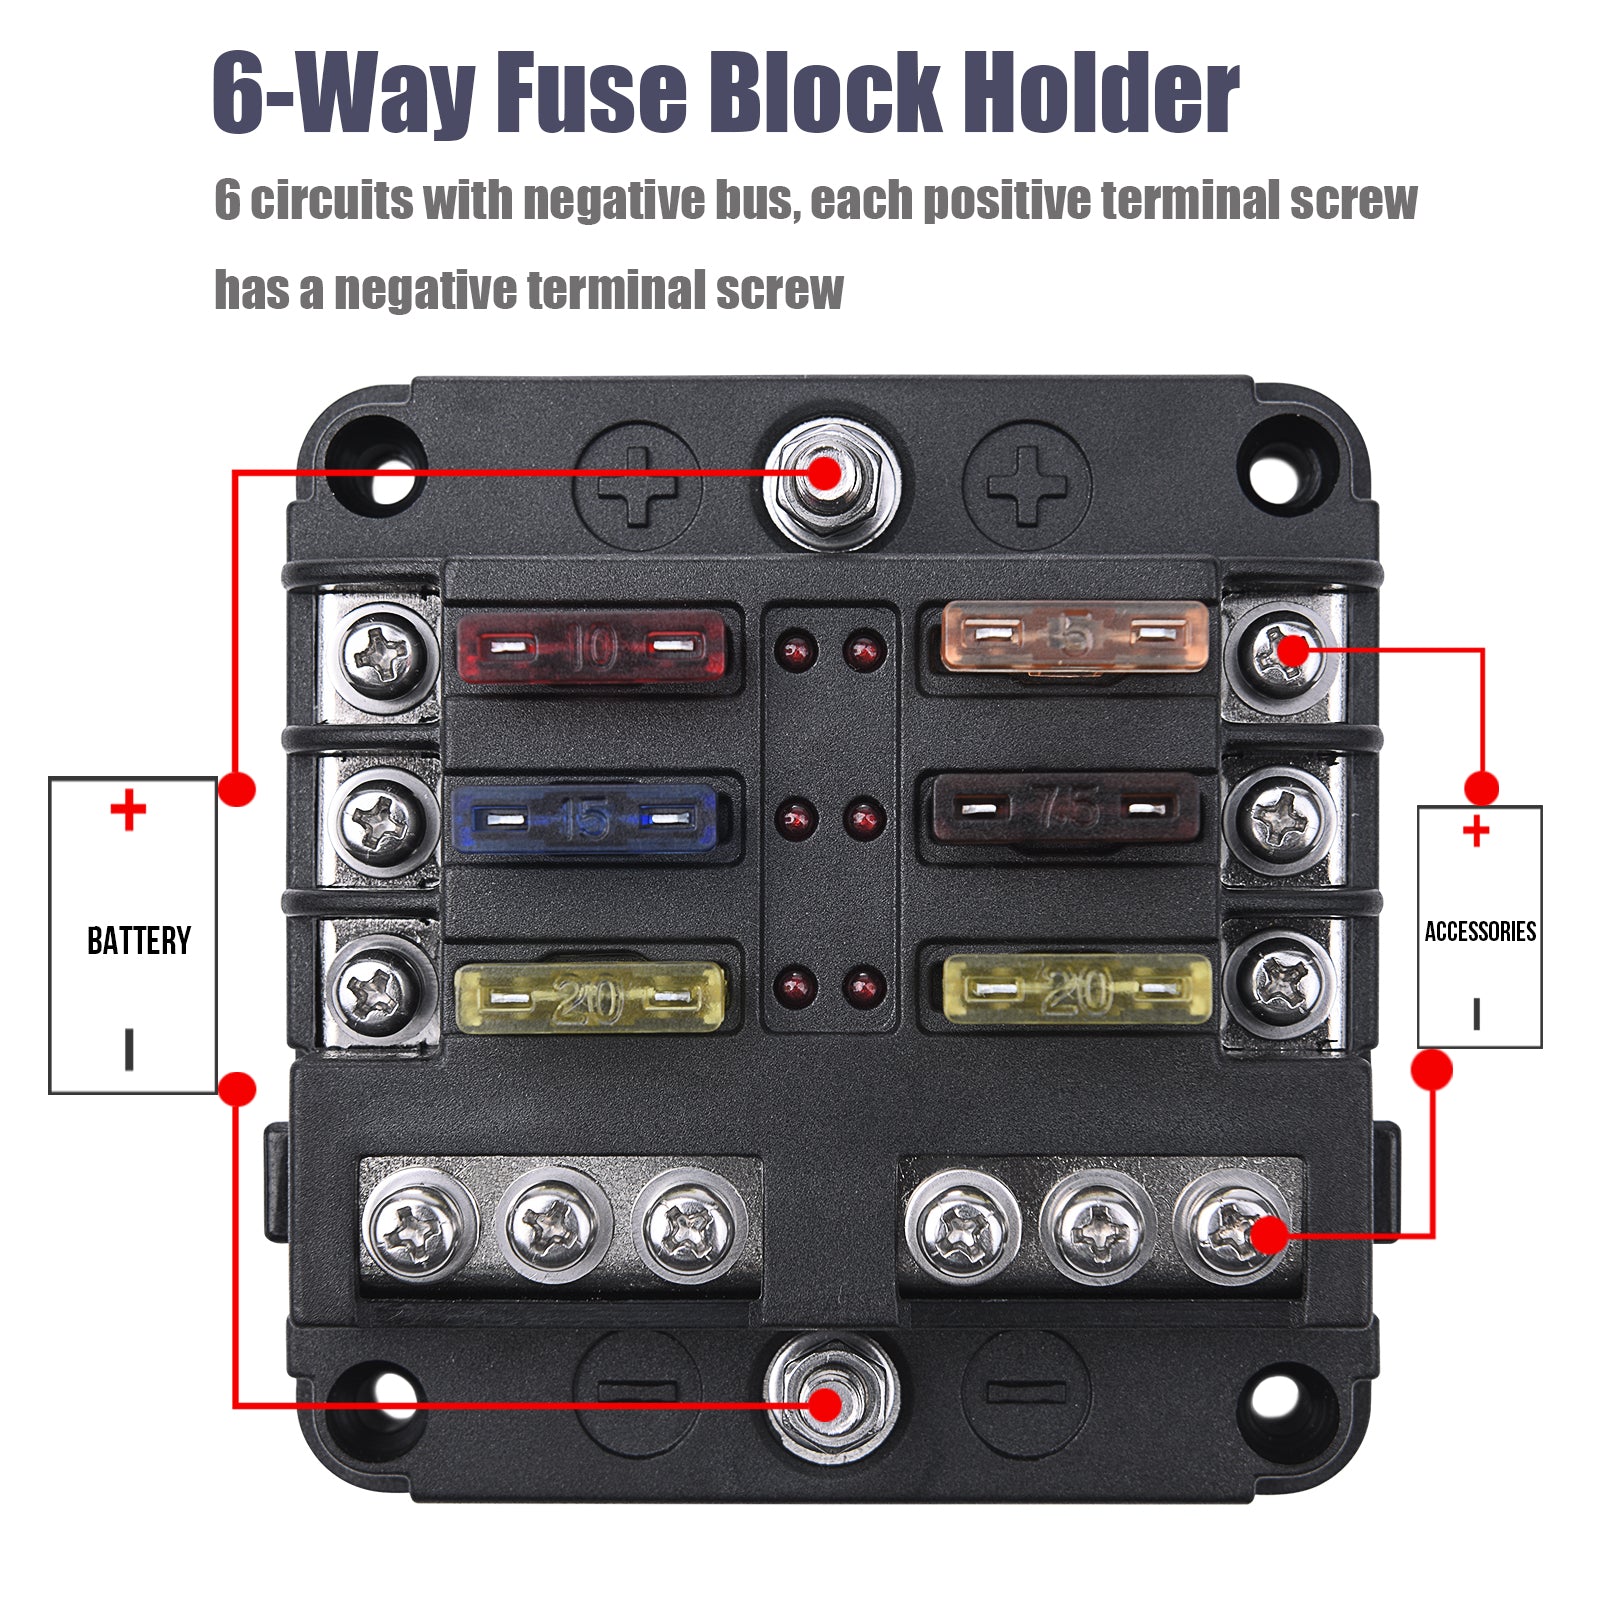 6-Way Fuse Block Holder - Blade Fuse Box Screw Nut Terminal with Negative Bus, 7.5A 5A 10A 15A 20A 25A Fuses, LED Indicator, Sticker Labels